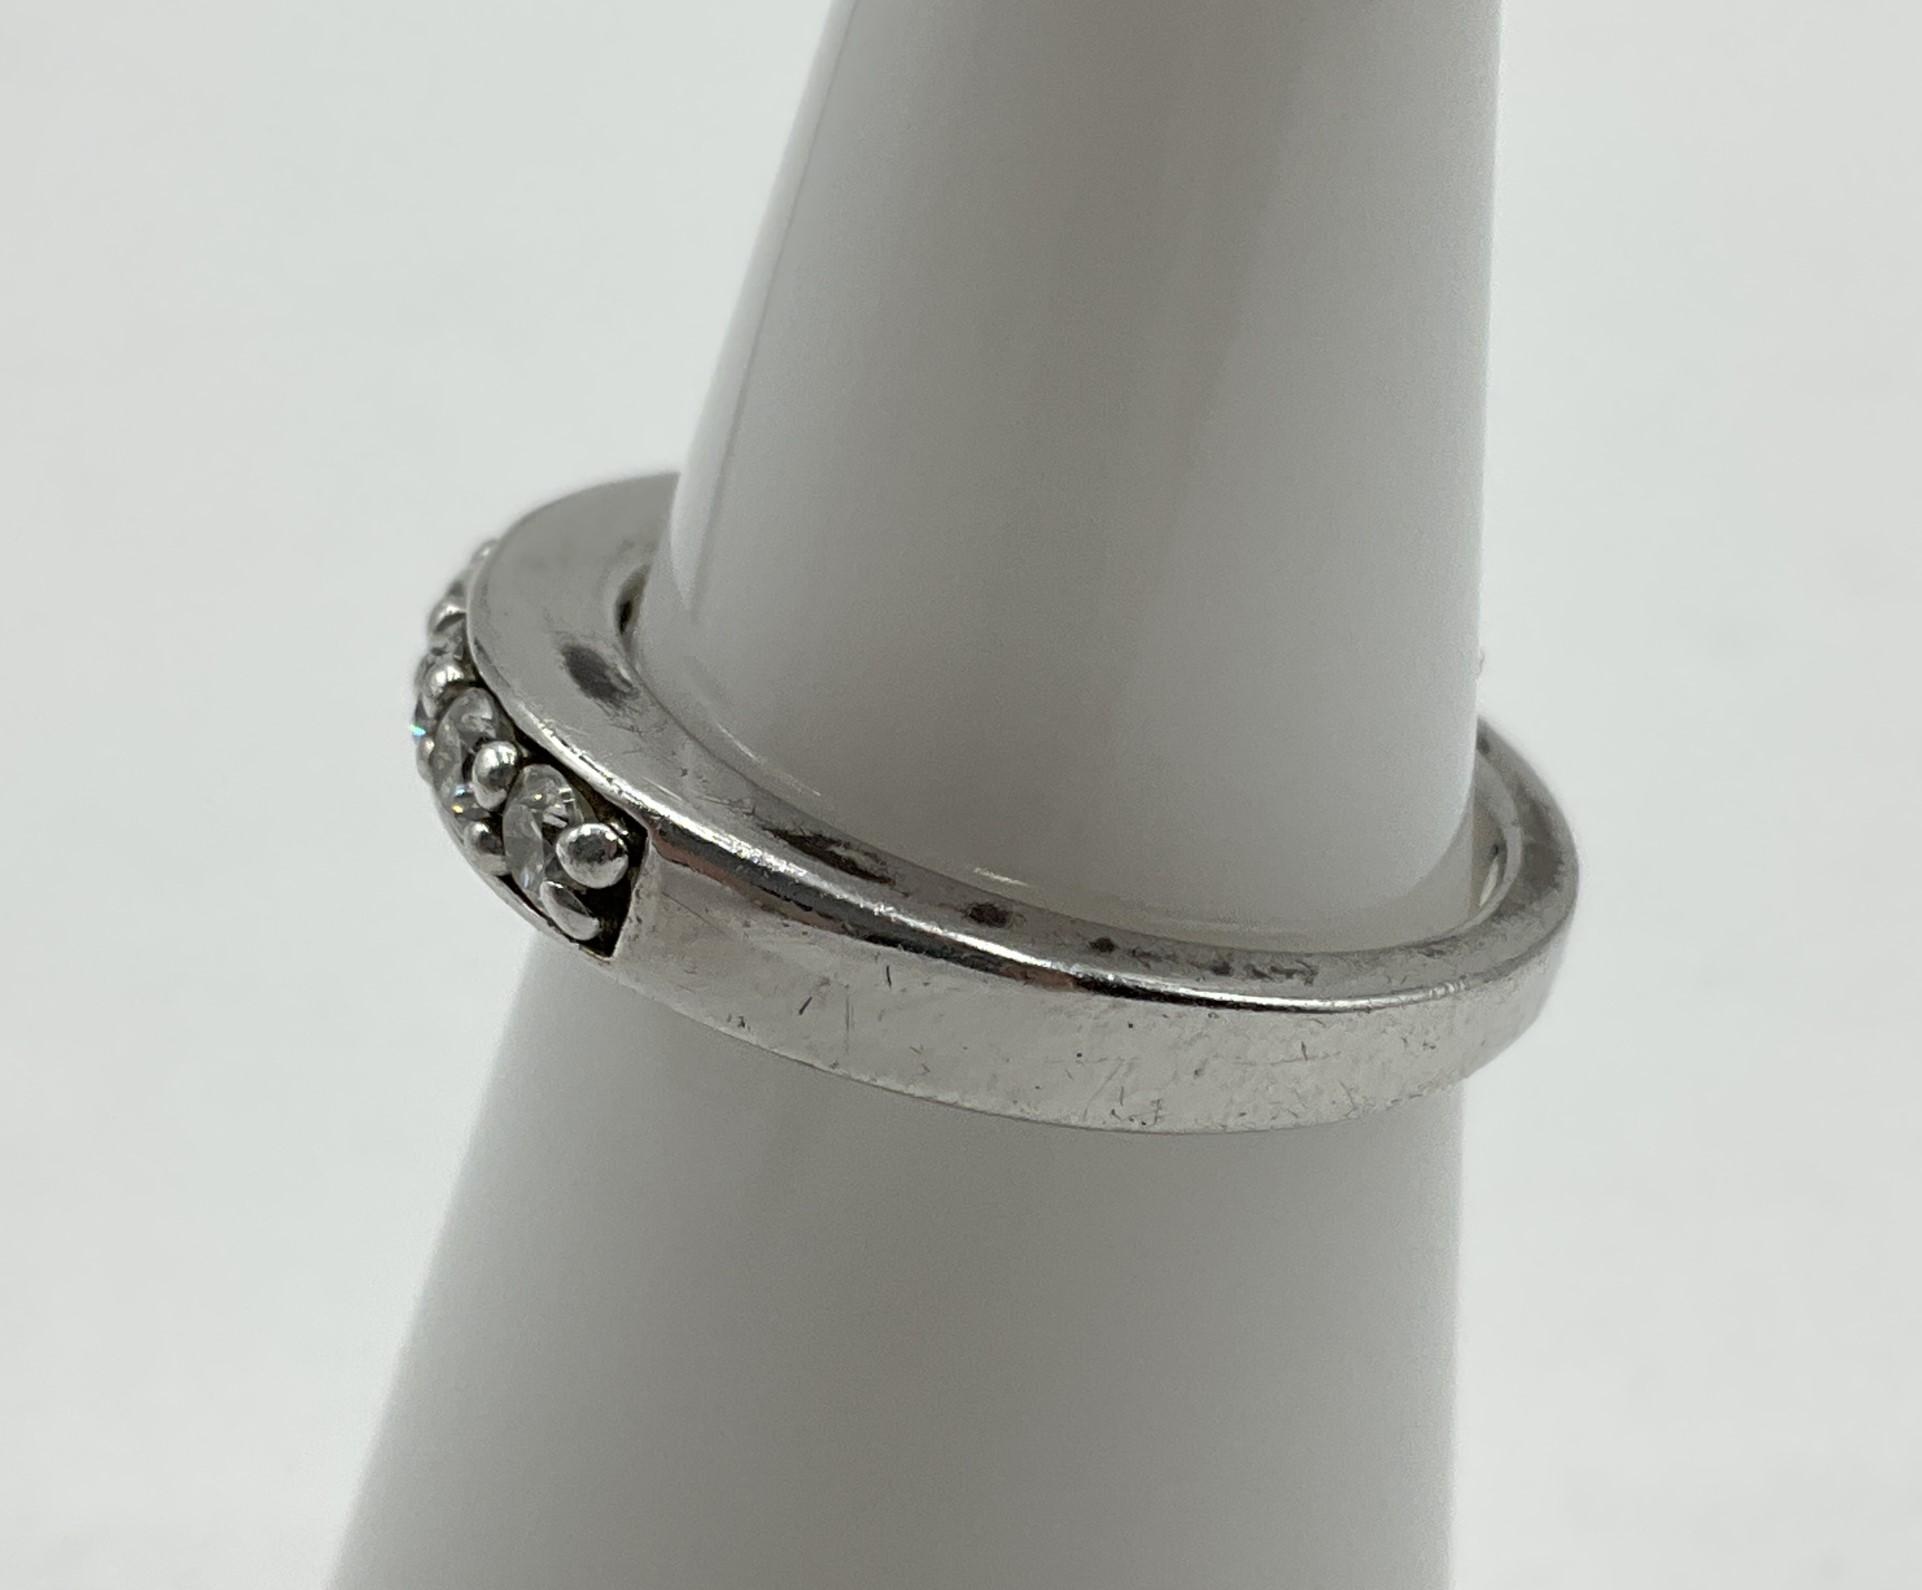 2.8g .925 Sterling Ring Size 6